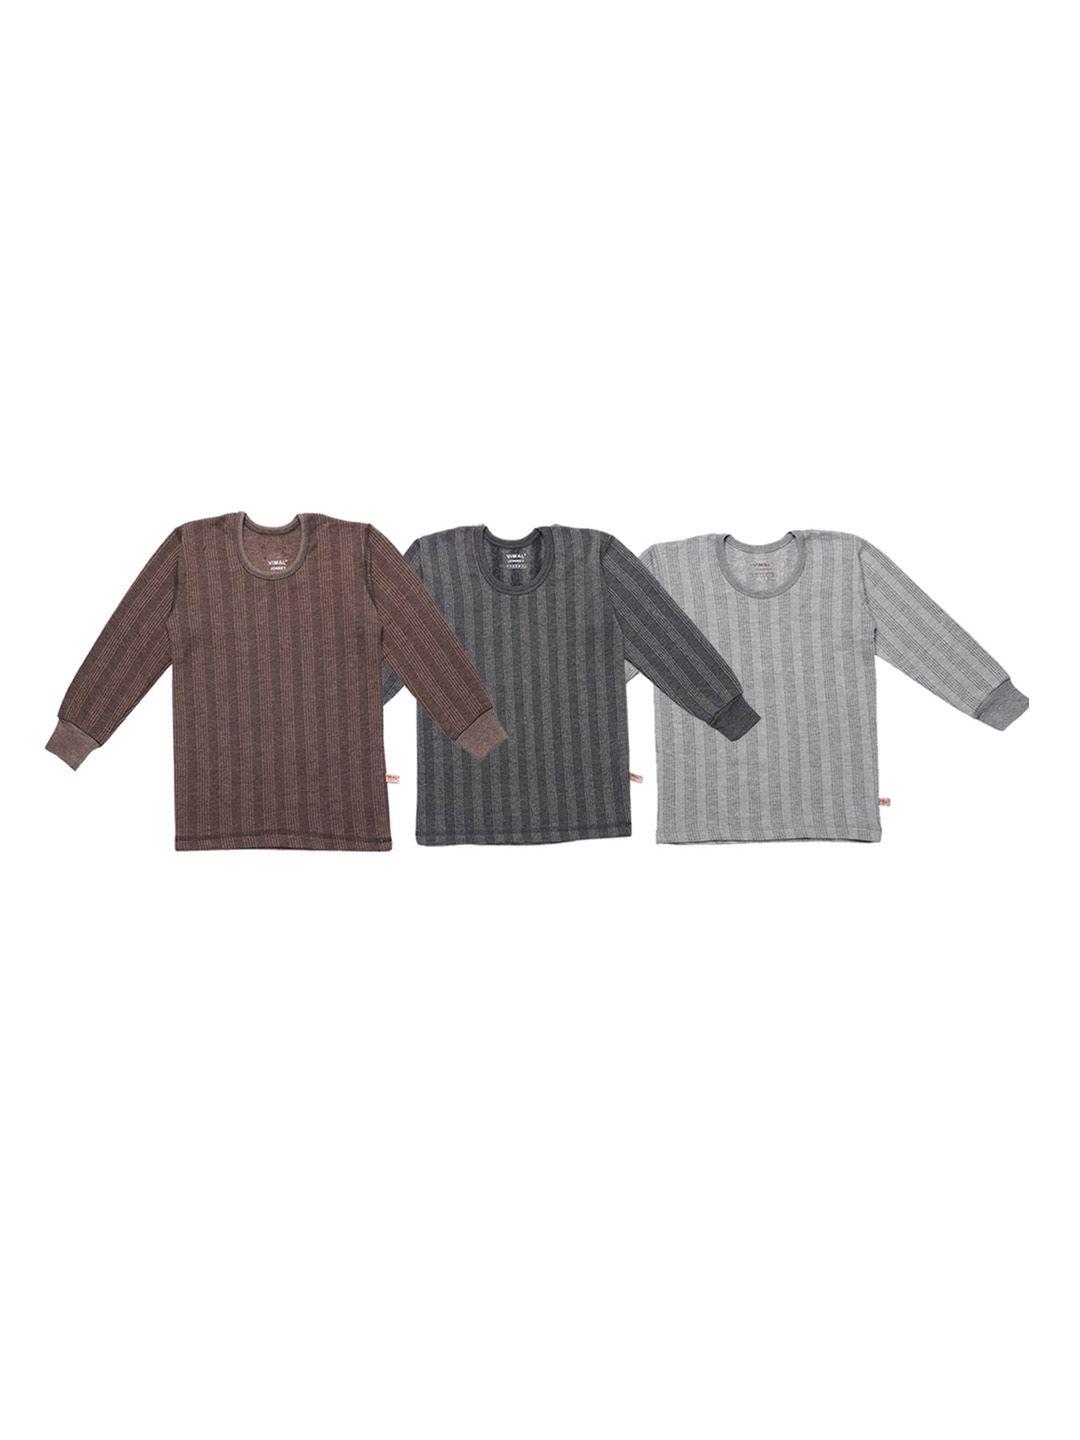 vimal jonney infant kids pack of 3 striped cotton thermal tops